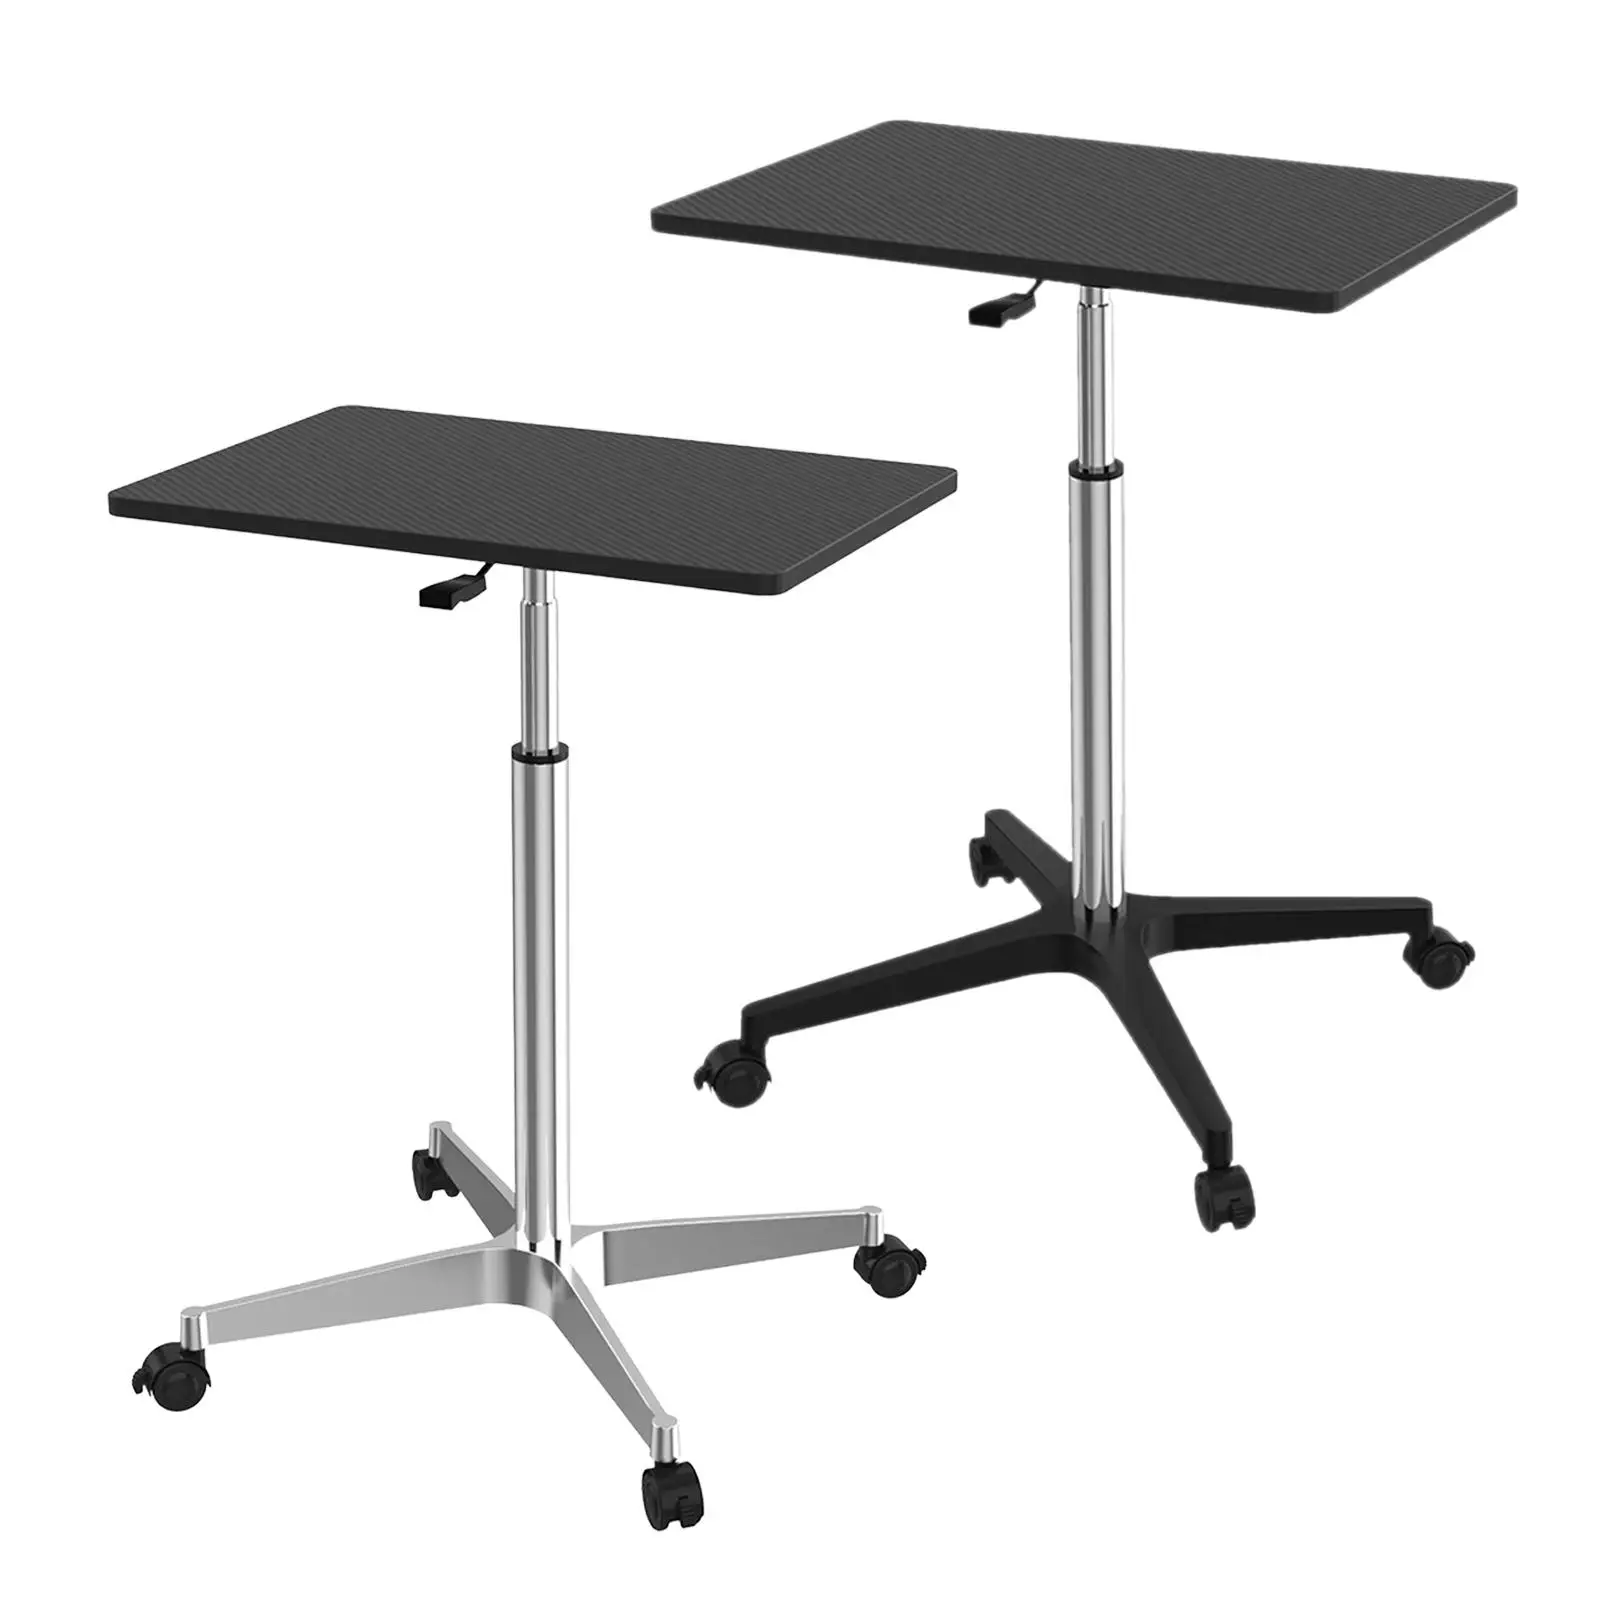 Height Adjustable Mobile Laptop Standing Table Cart for Home Office Black Color Multi Purpose Computer Desk Stand Lightweight